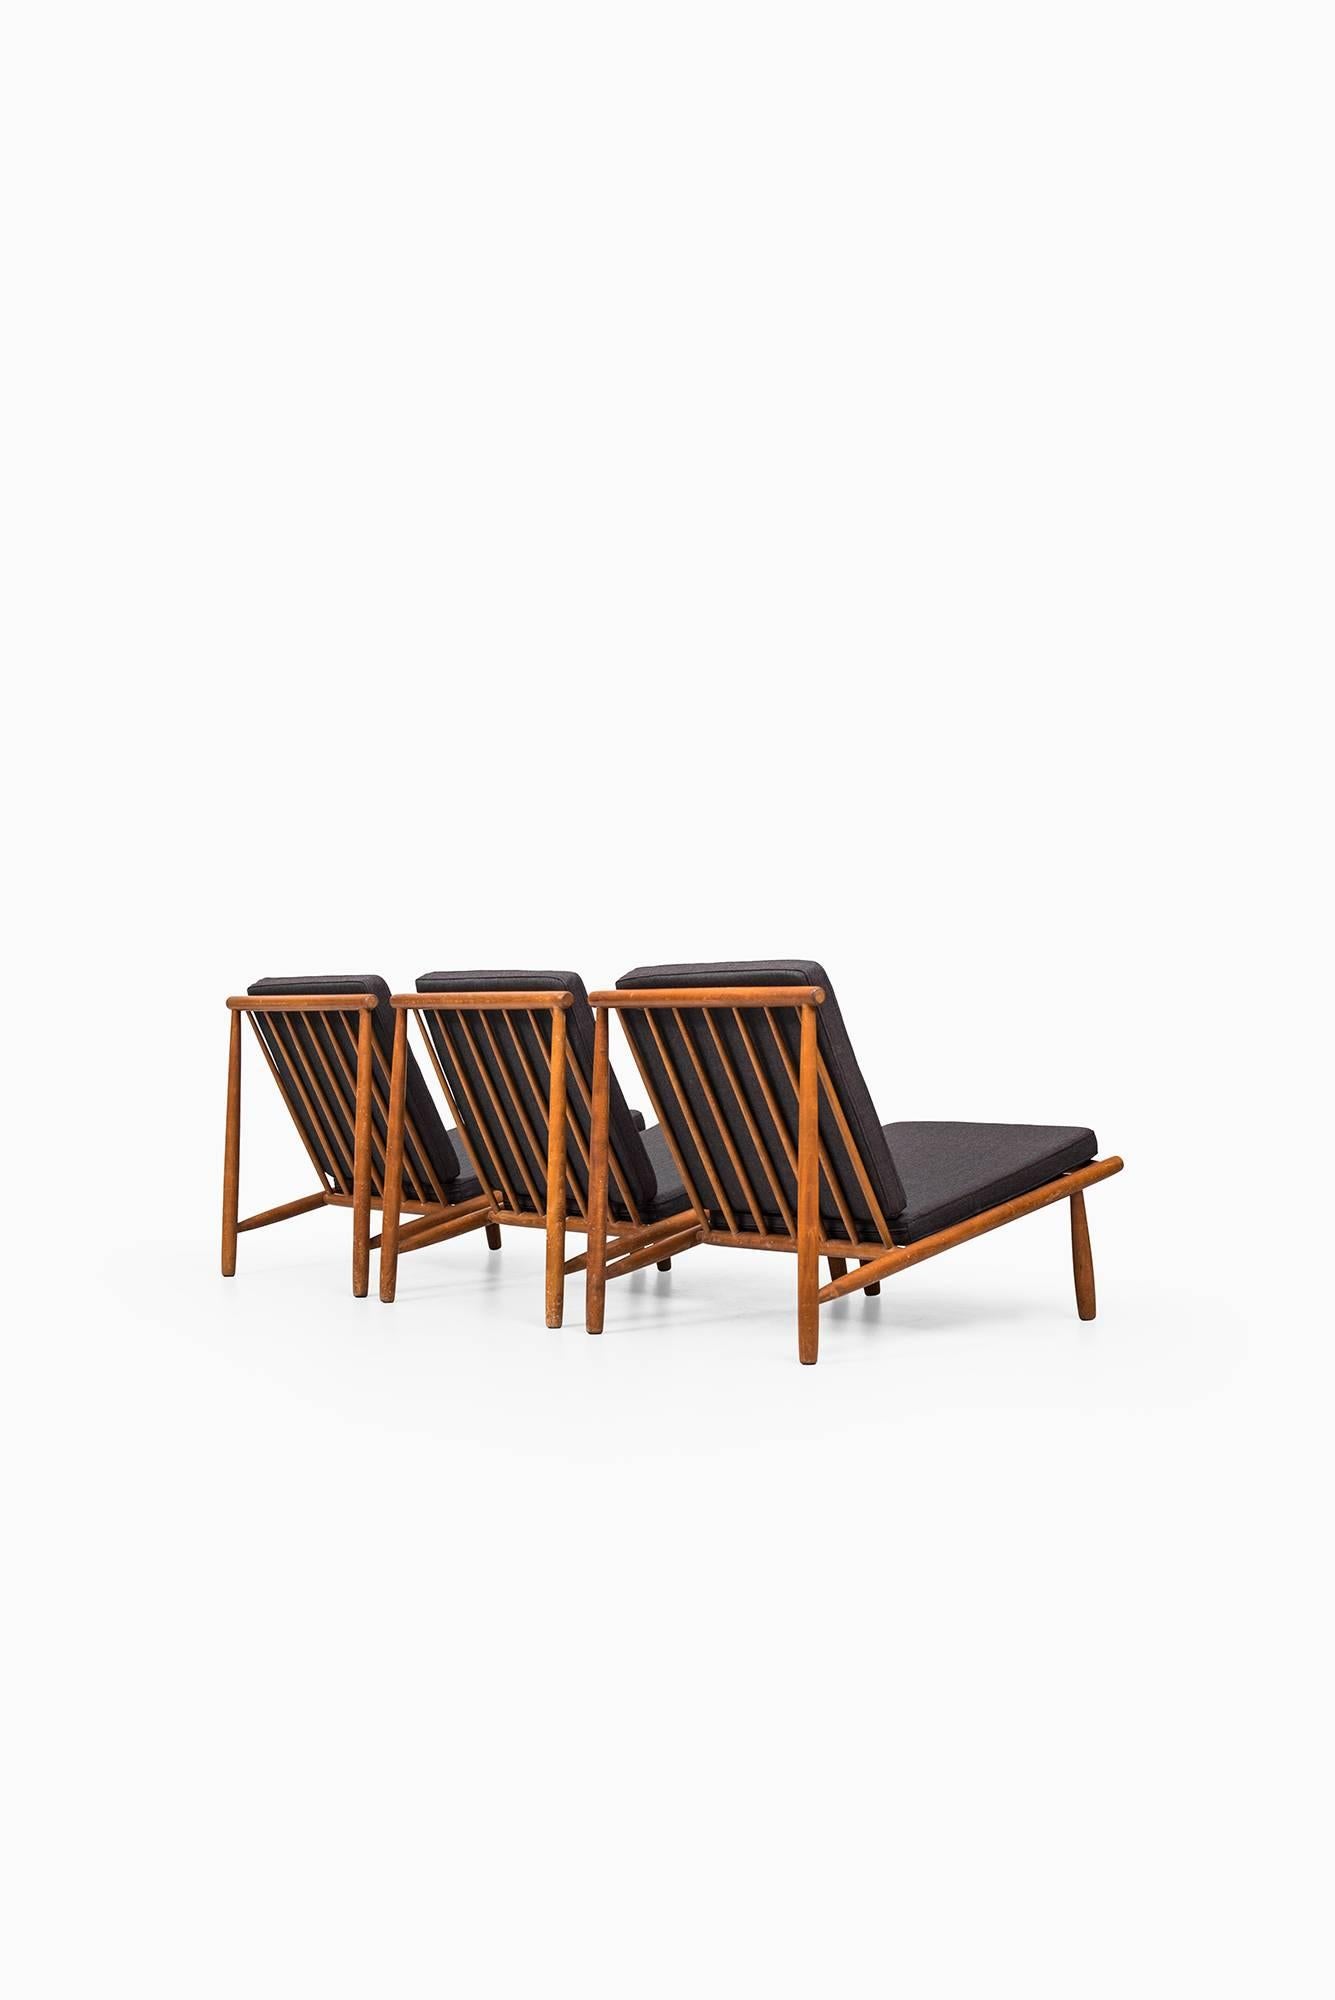 Set of three easy chairs model Domus designed by Alf Svensson. Produced by Dux in Sweden.